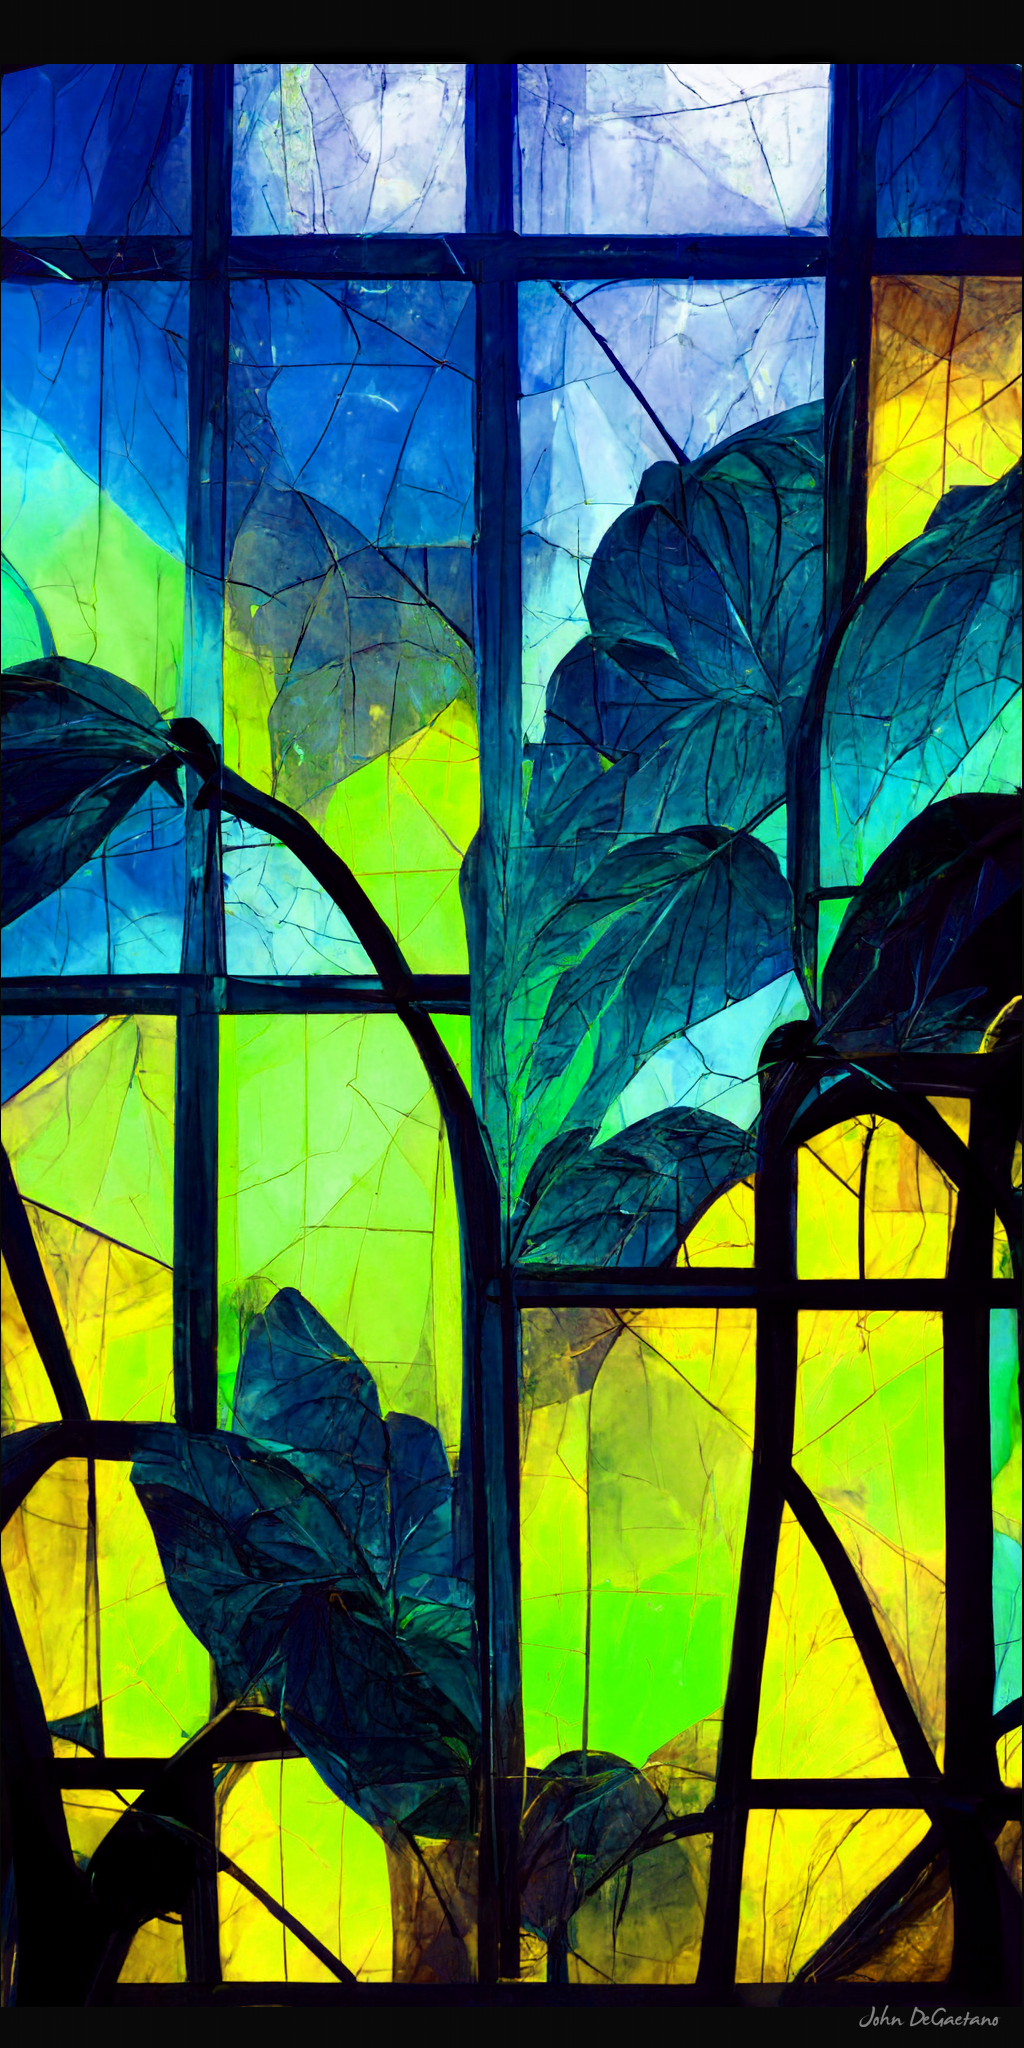 Stain Glass-Left Image